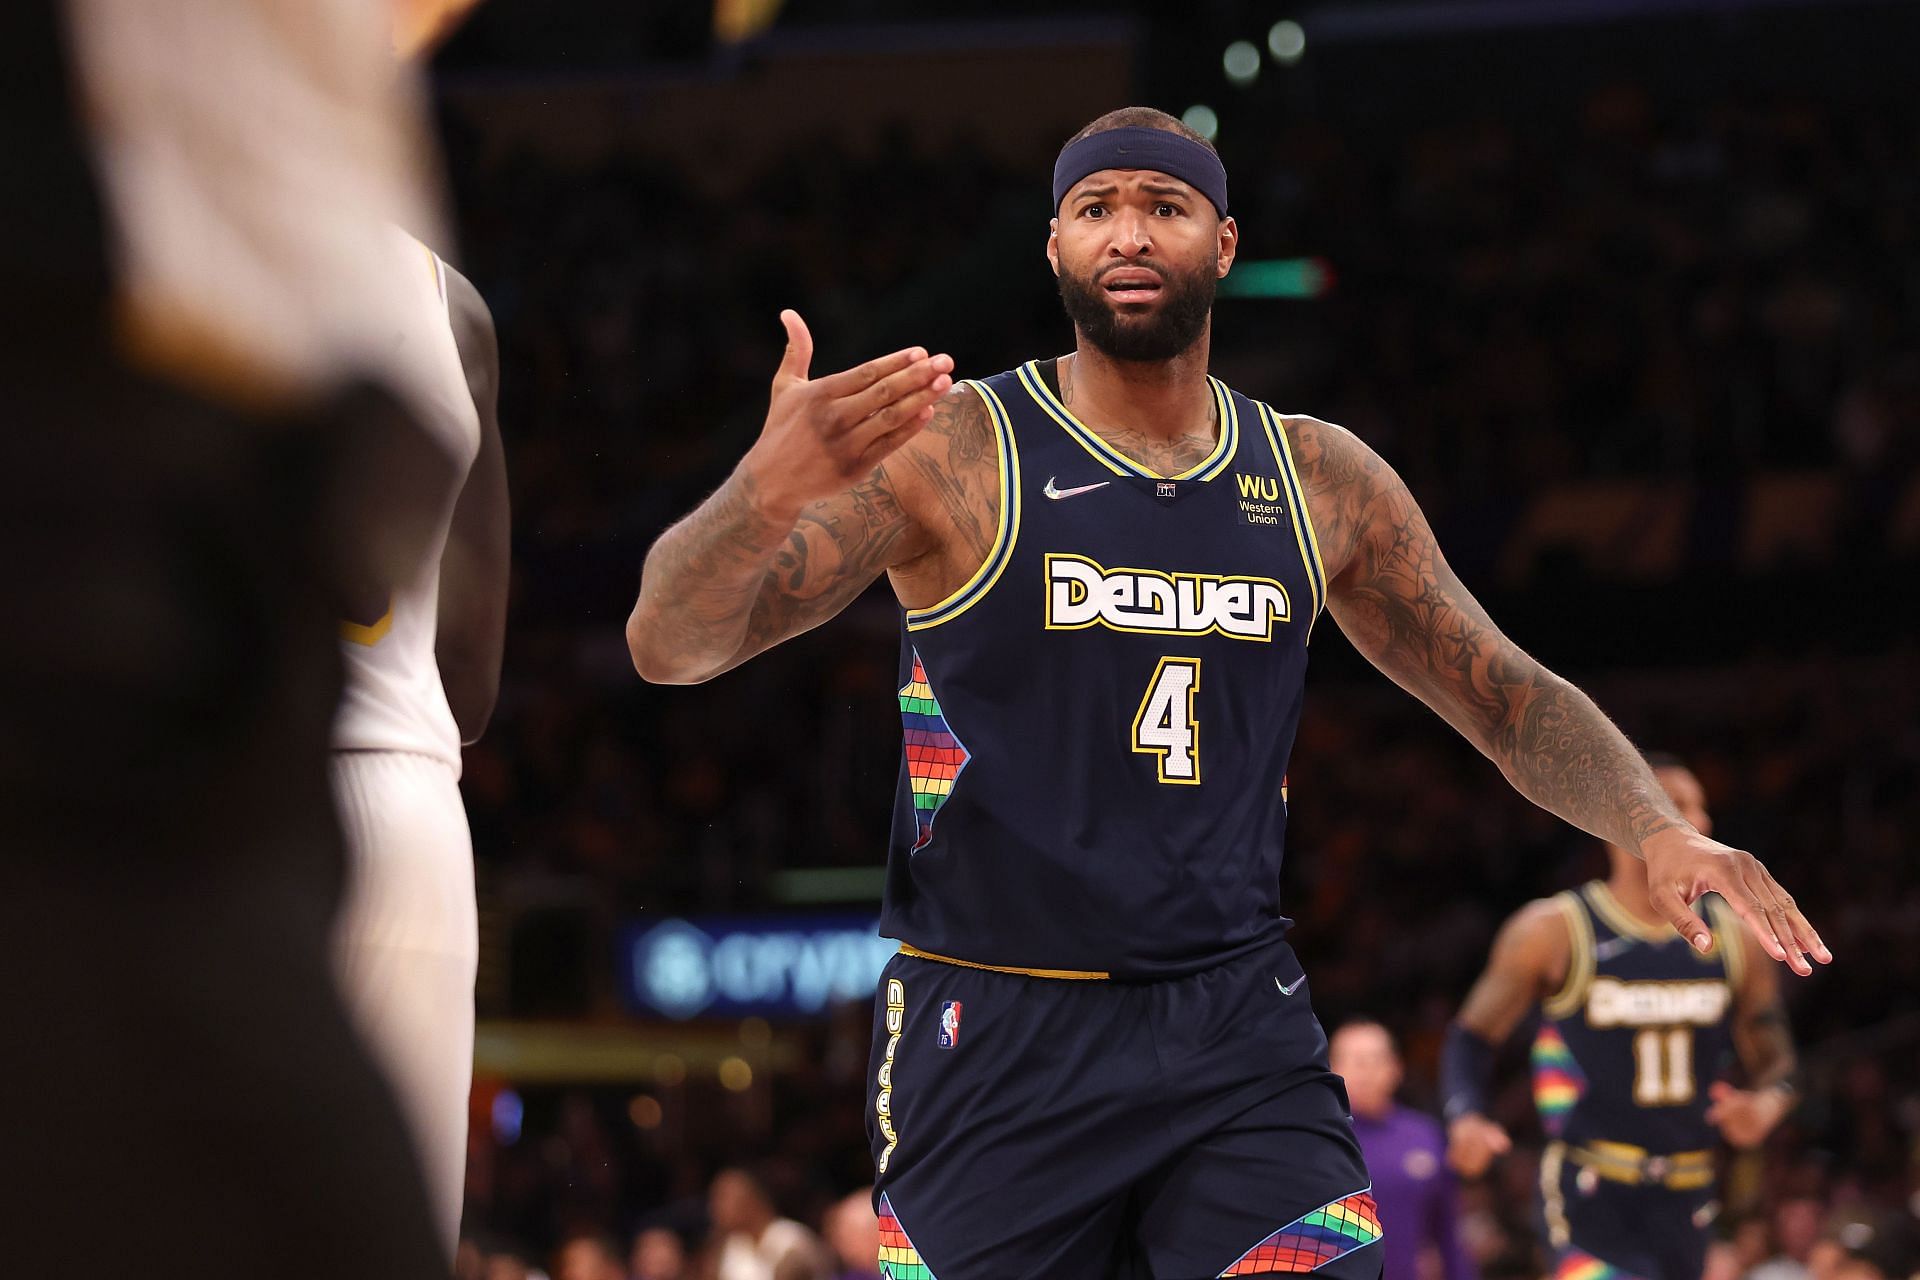 Hi Dwight, I'm coming” — DeMarcus Cousins is traveling to join Dwight  Howard in the T1 League - Basketball Network - Your daily dose of basketball